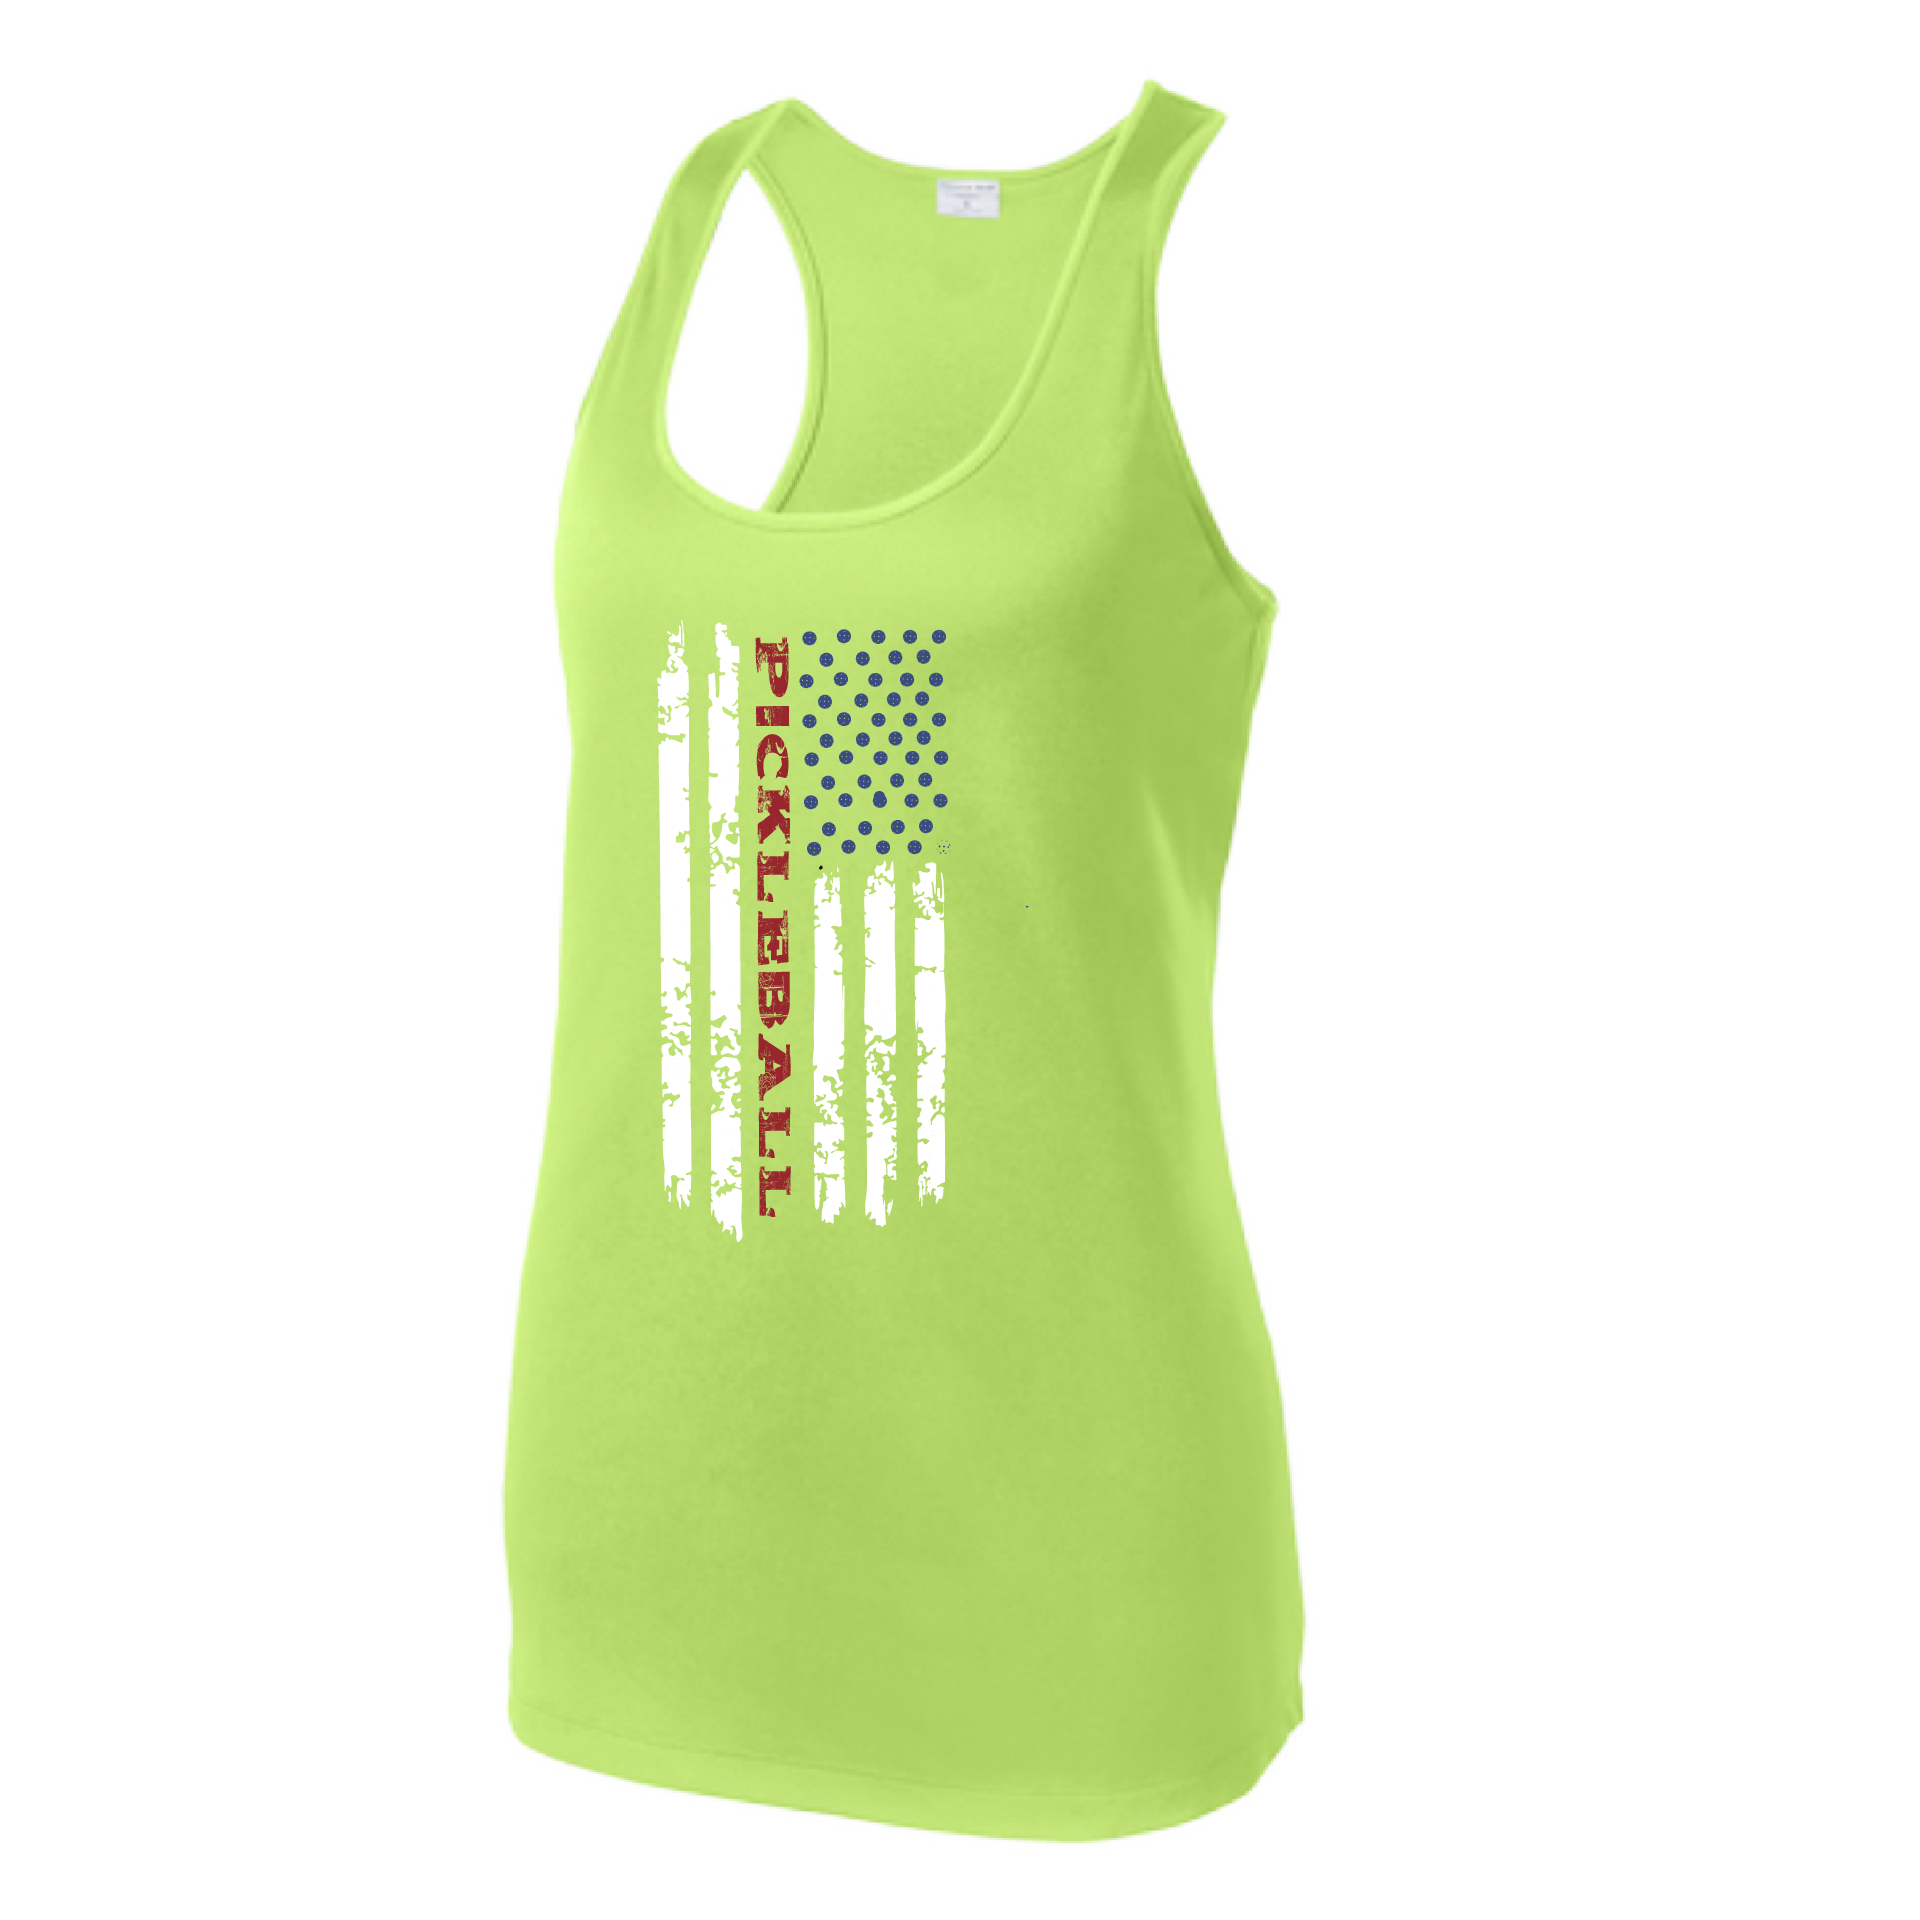 Pickleball Design: Pickleball Flag Horizontal or Vertical on Front of Shirt  Women's Style: Racerback Tank  Turn up the volume in this Women's shirt with its perfect mix of softness and attitude. Material is ultra-comfortable with moisture wicking properties and tri-blend softness. PosiCharge technology locks in color. Highly breathable and lightweight.